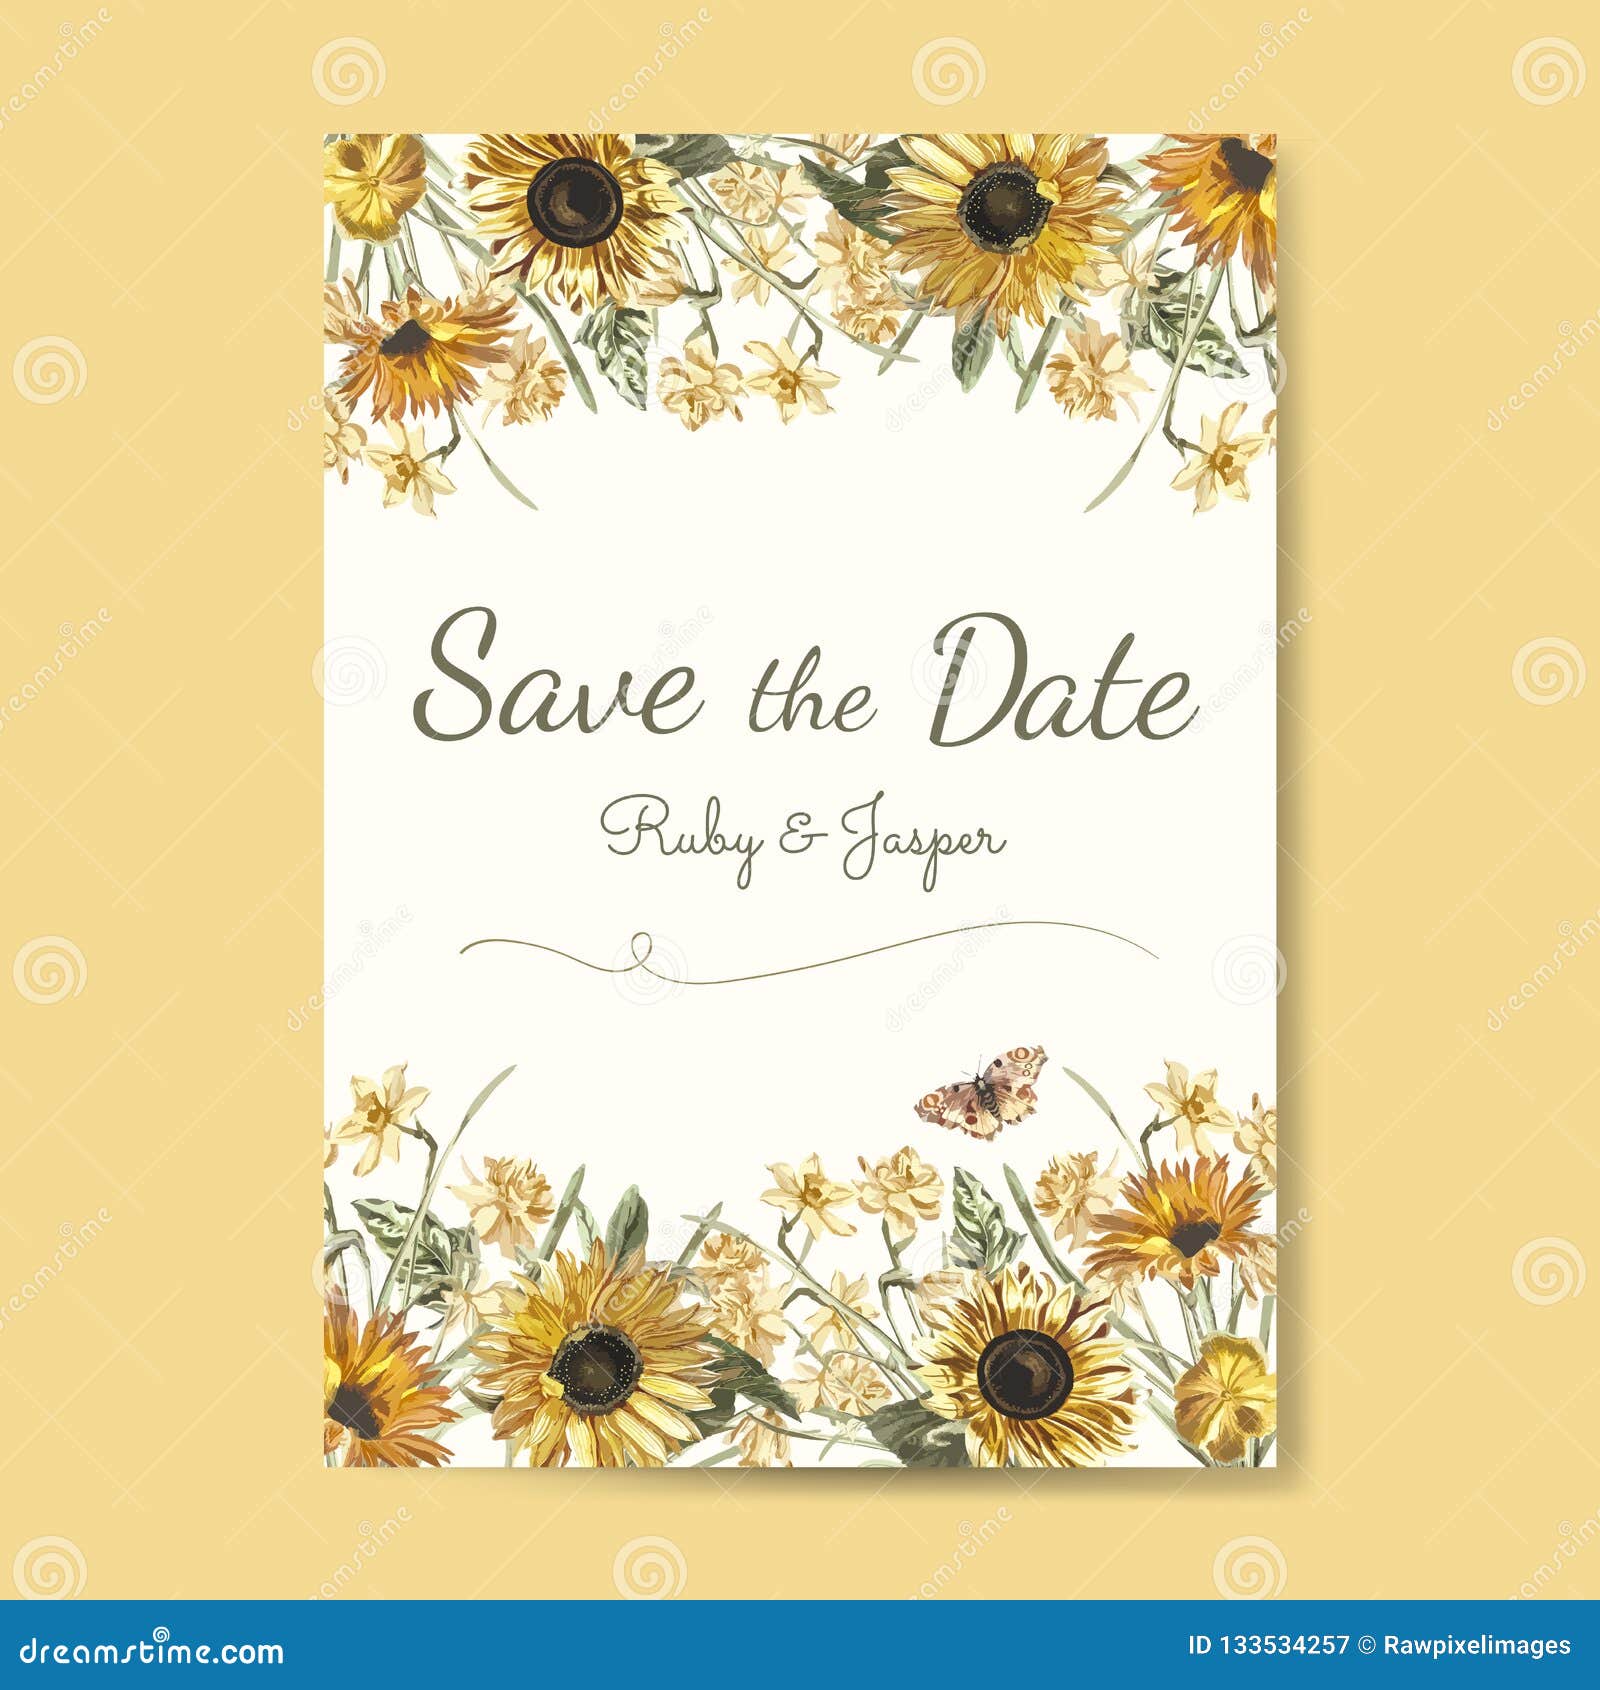 Download Save The Date Wedding Invitation Mockup Vector Stock Vector Illustration Of Greeting Copy 133534257